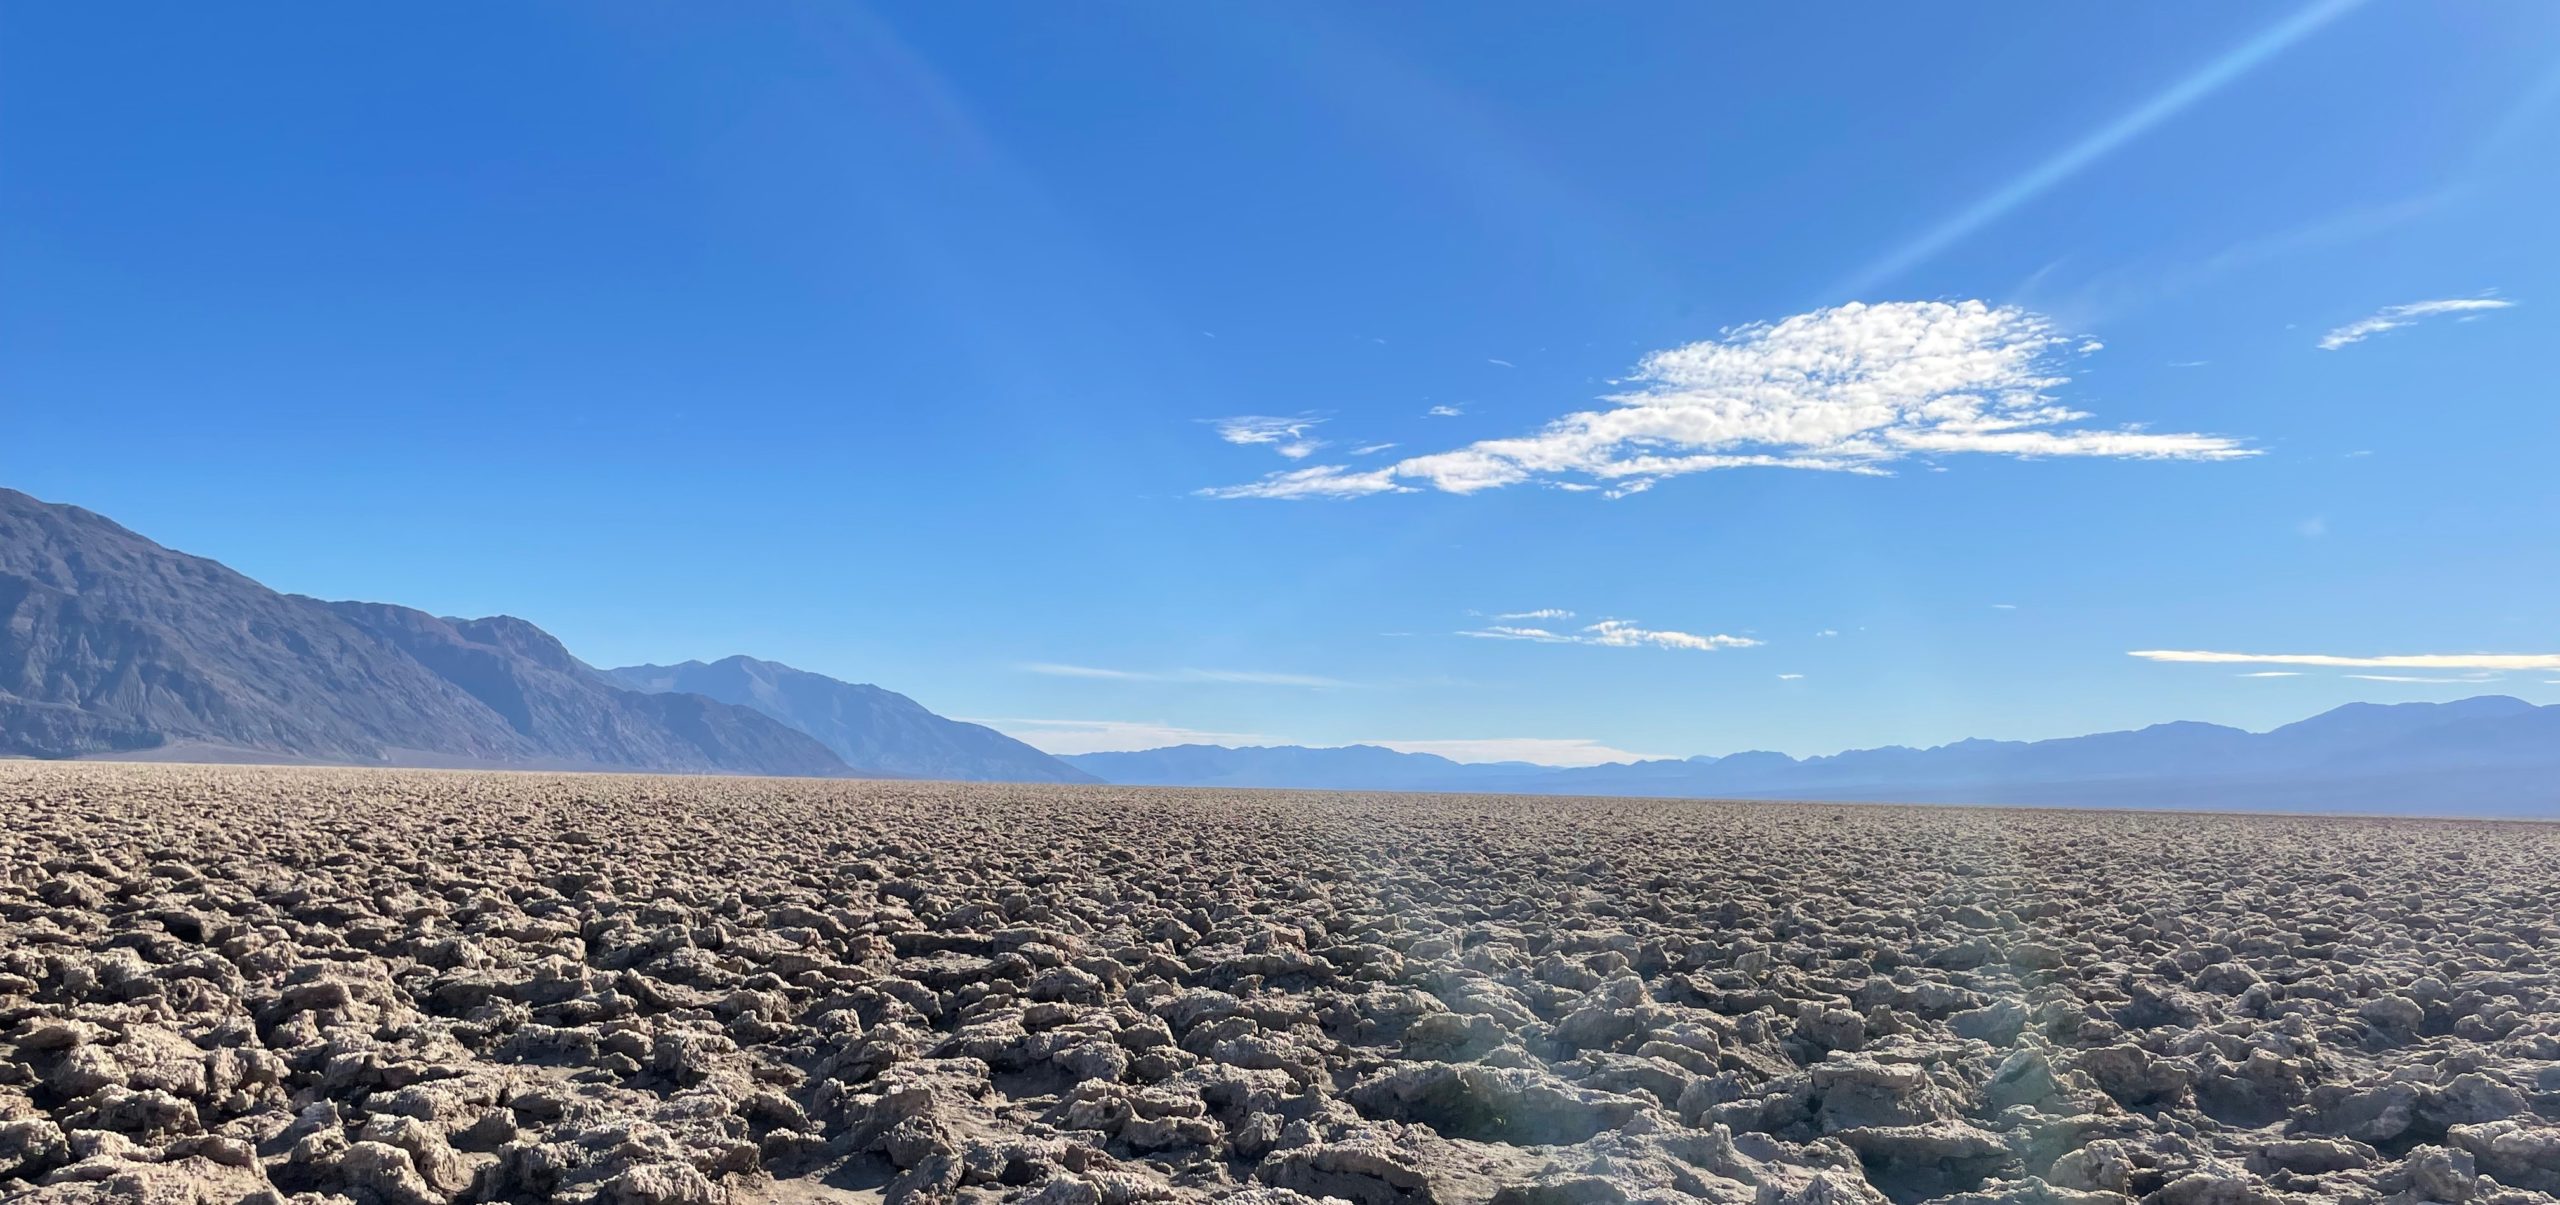 Devil's Golf Course in Death Valley National Park